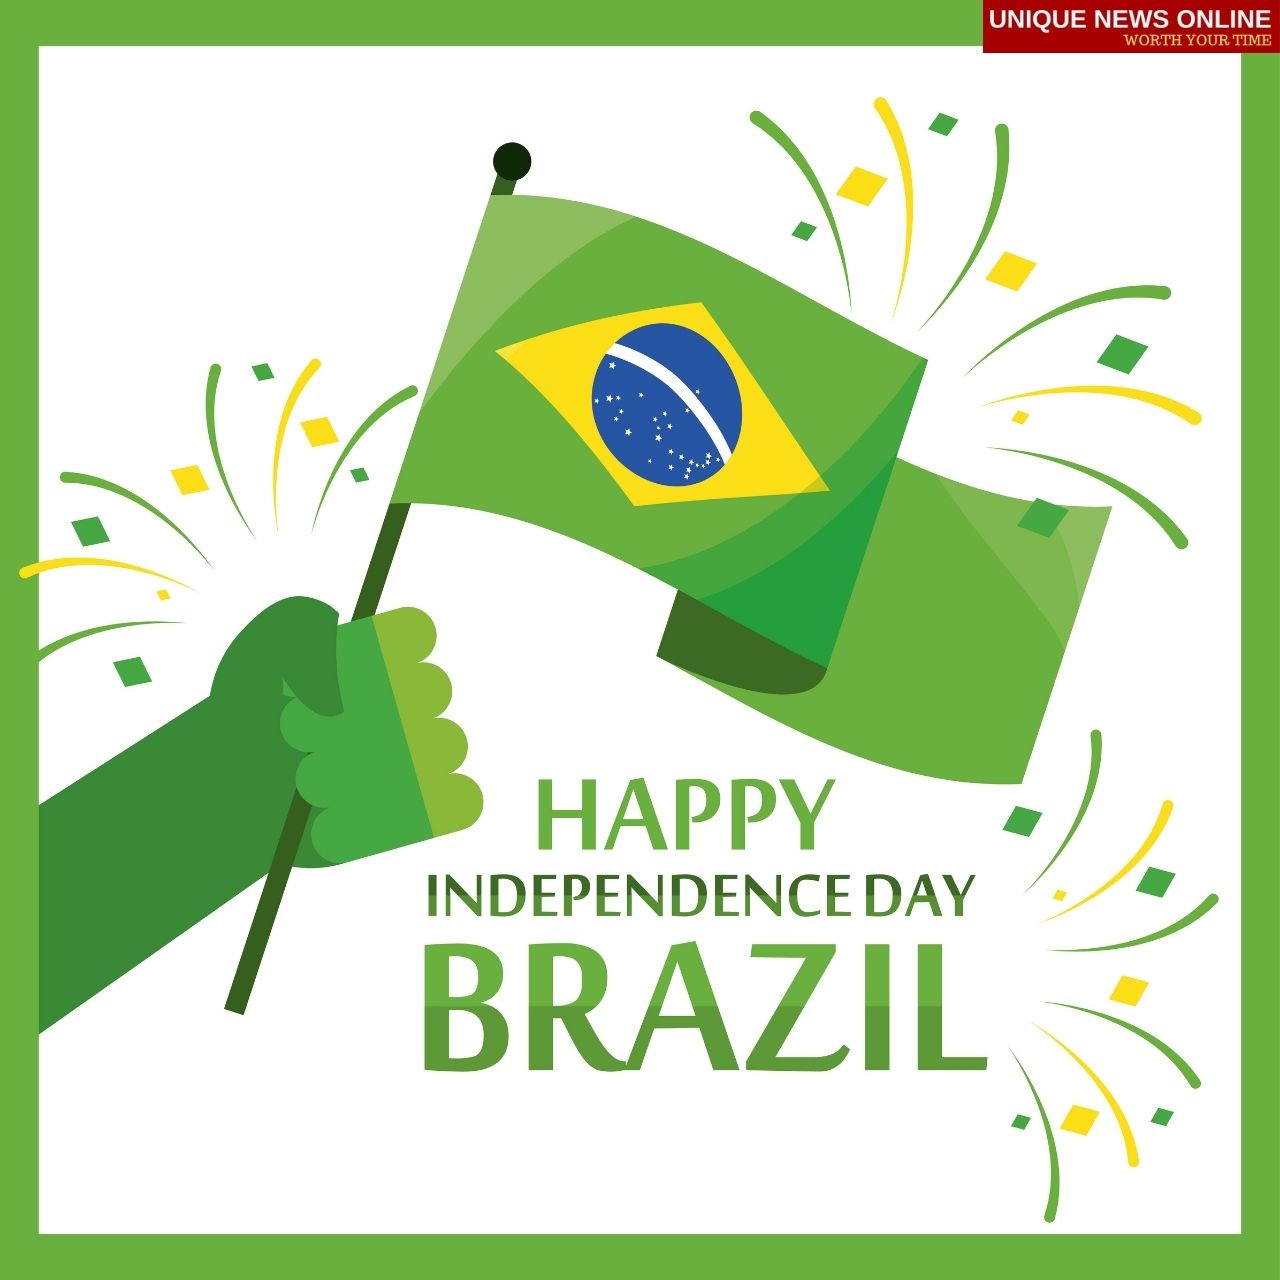 Brazil Independence Day 2021 Wishes, HD Images, Quotes, Messages, Greetings, Stickers and Messages to Share,